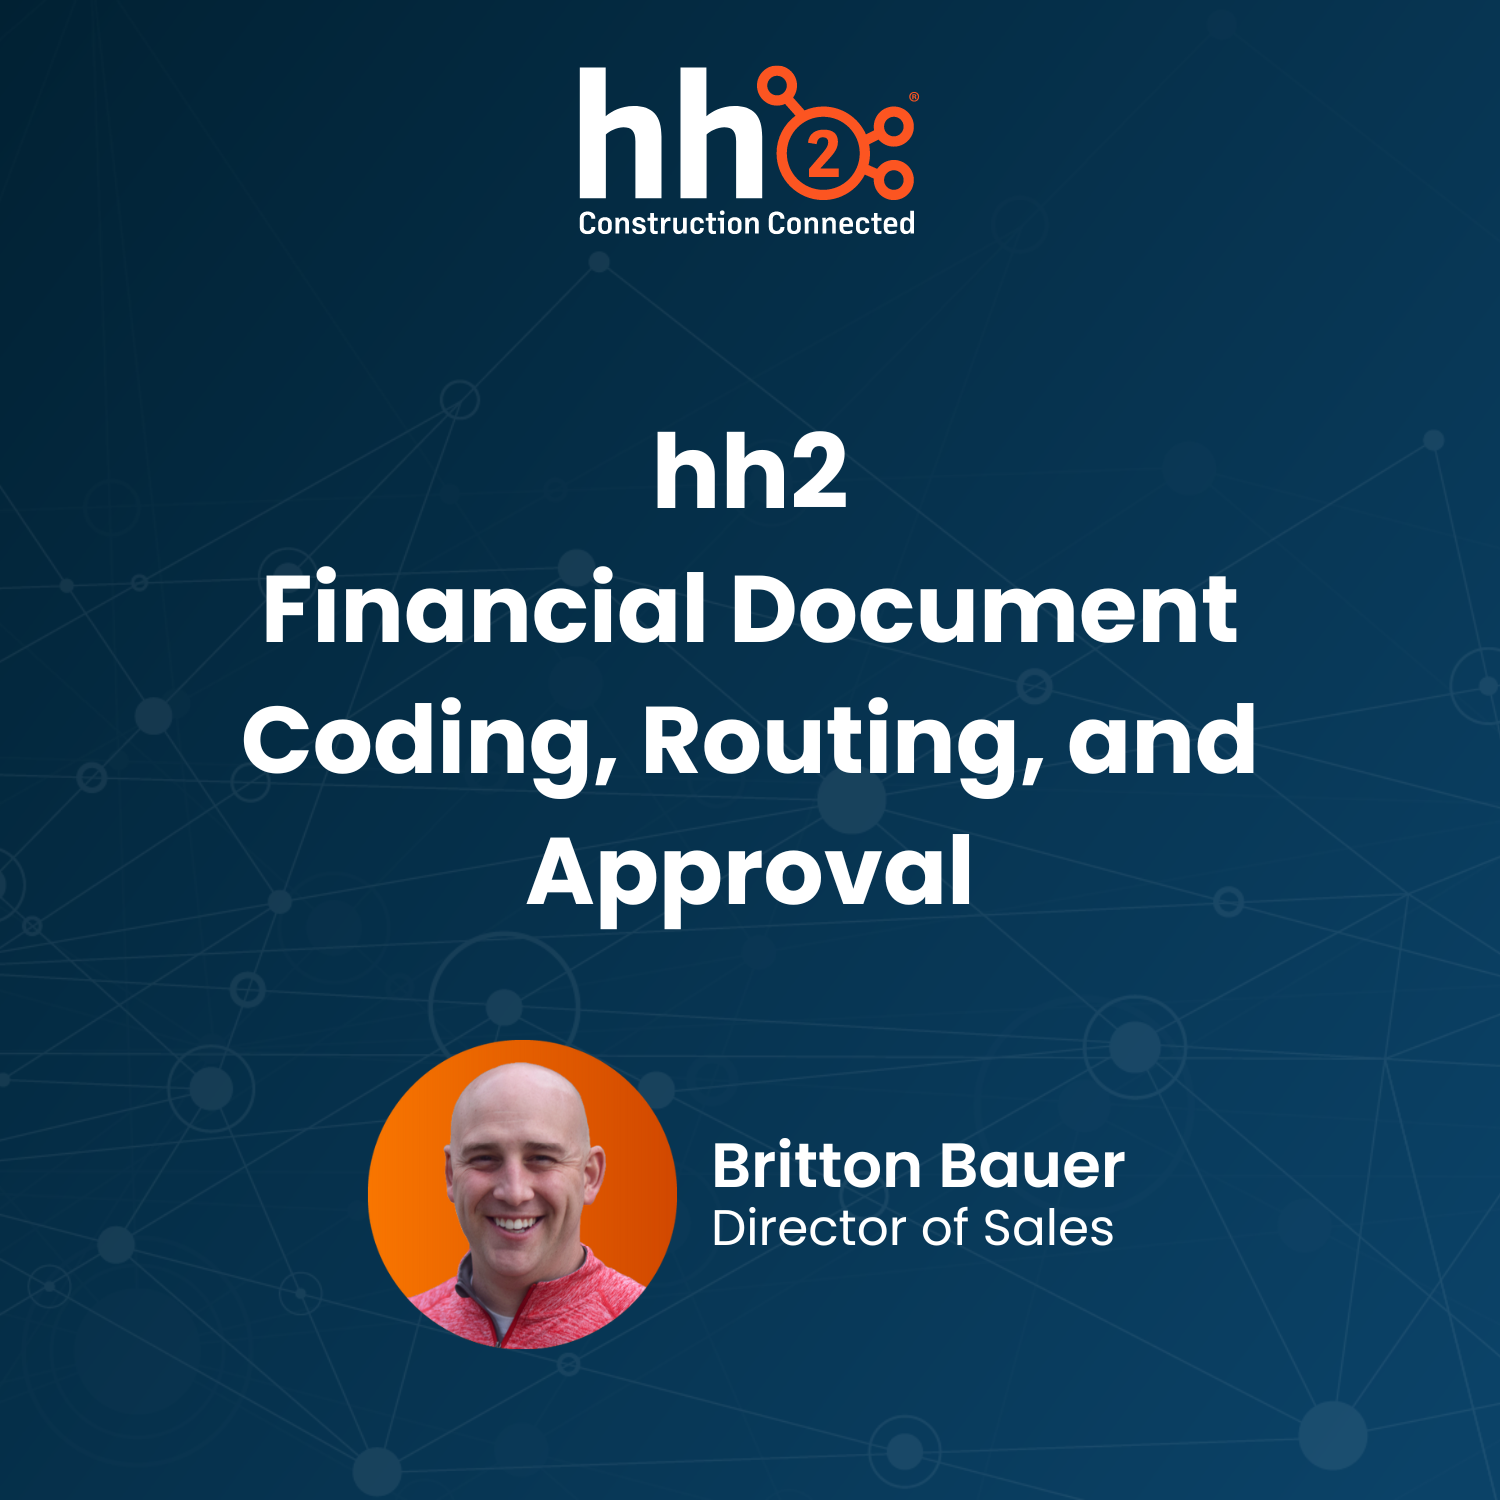 hh2 Financial Document Coding, Routing, and Approval